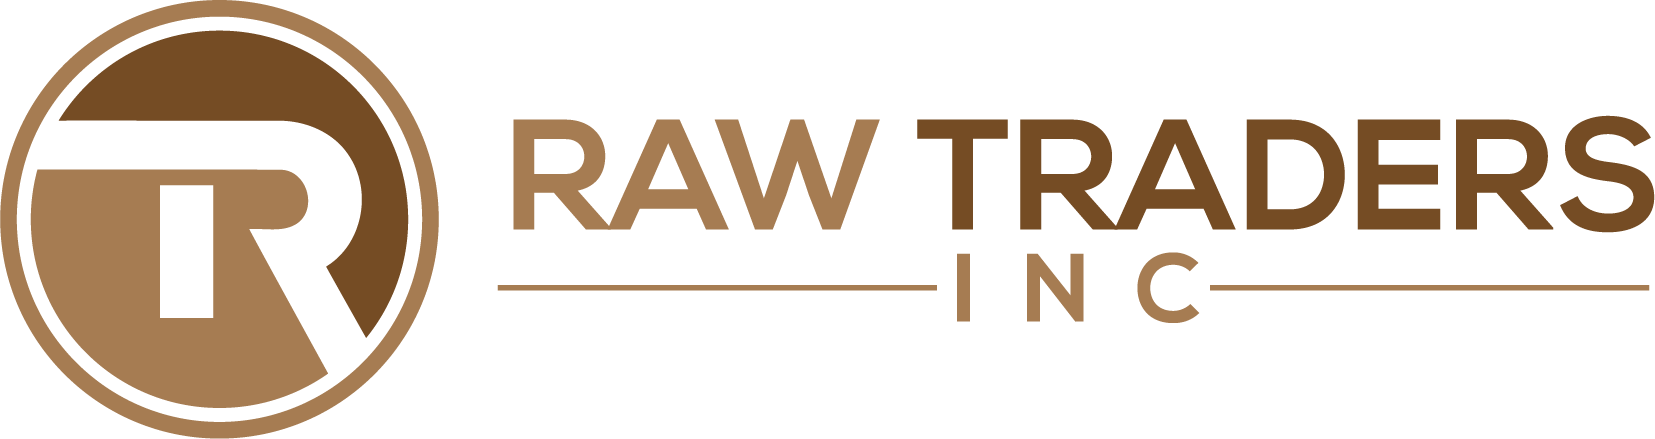 RAW TRADERS INC-Your premier source for natural resins